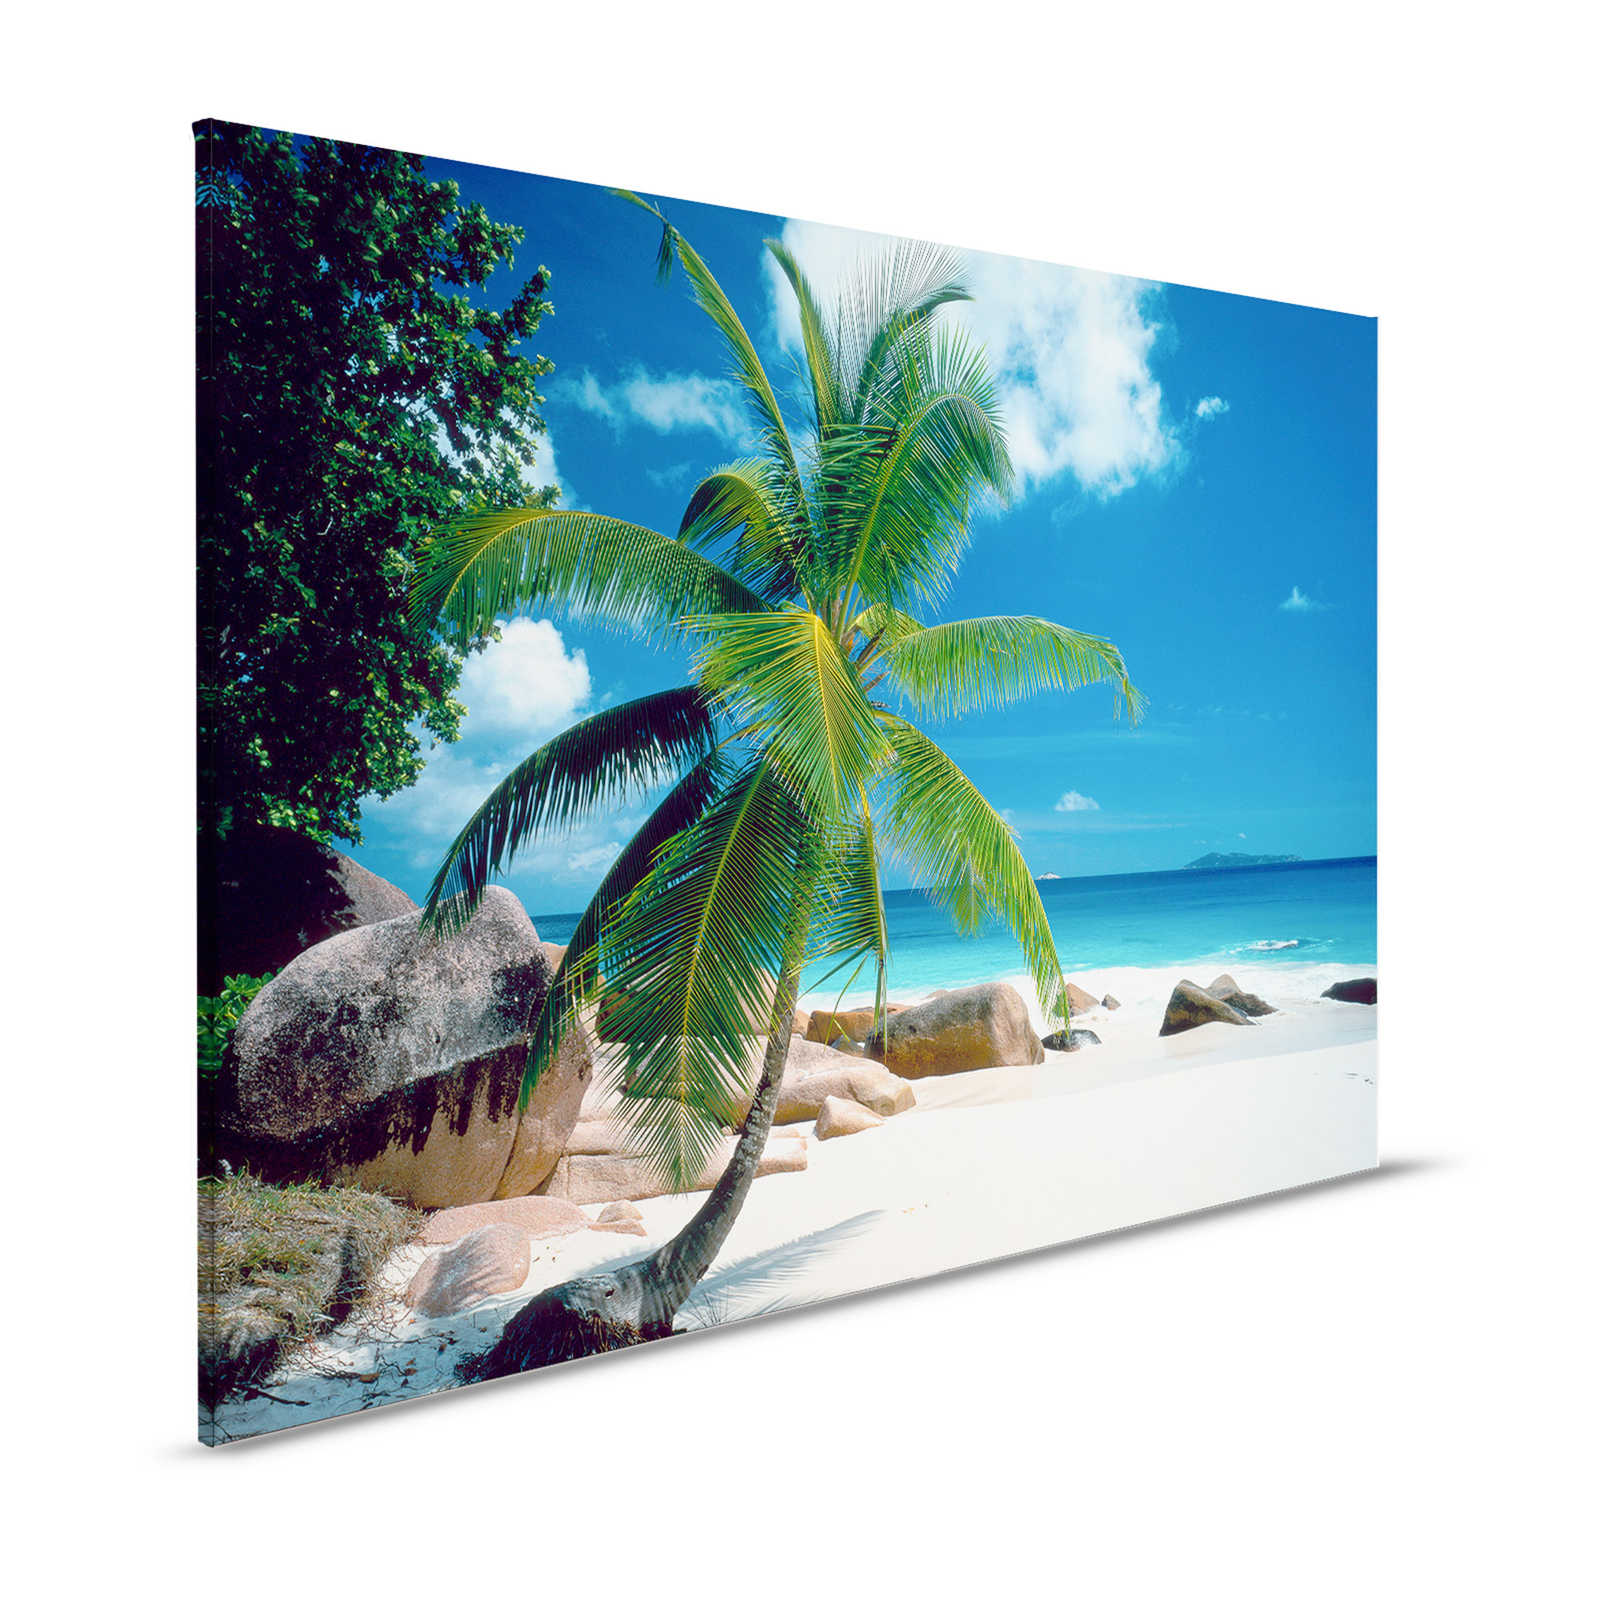 Canvas painting Beach with Palm Tree - 1,20 m x 0,80 m
